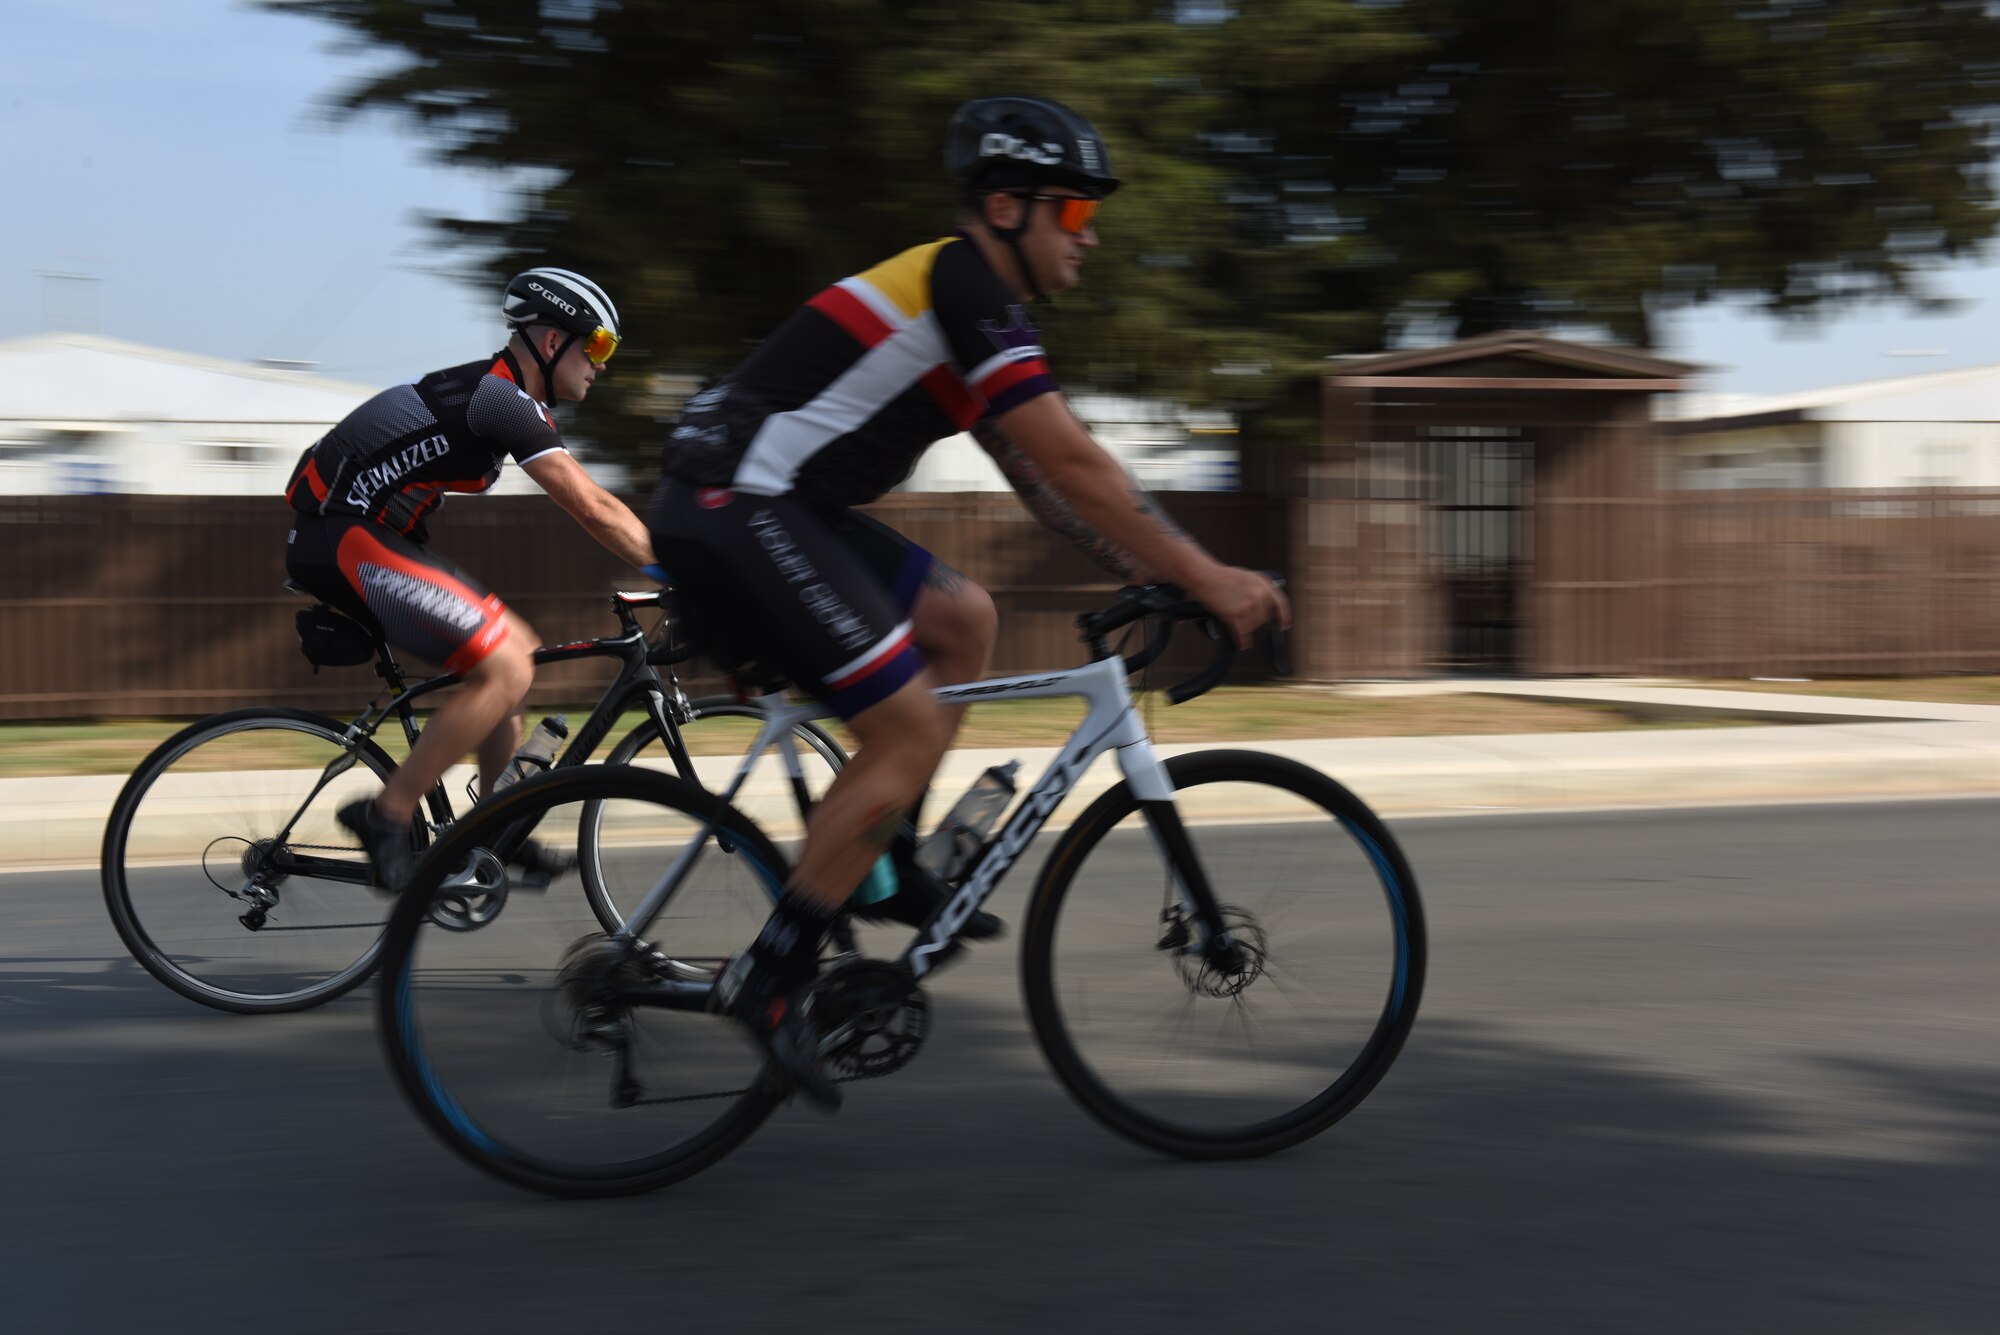 Staff Sgt. Chase Kelly, 39th Operations Support Squadron air traffic controller watch supervisor, left, and Master Sgt. Jonathan Wyatt, 39th Operations Support Squadron NCO in charge of air traffic control standardization and evaluation, right, ride their bikes June 1, 2019, at Incirlik Air Base, Turkey. The pair are part of a bike group, which is designed to help Airmen decrease stress levels and build morale. (U.S. Air Force photo by Staff Sgt. Matthew J. Wisher)